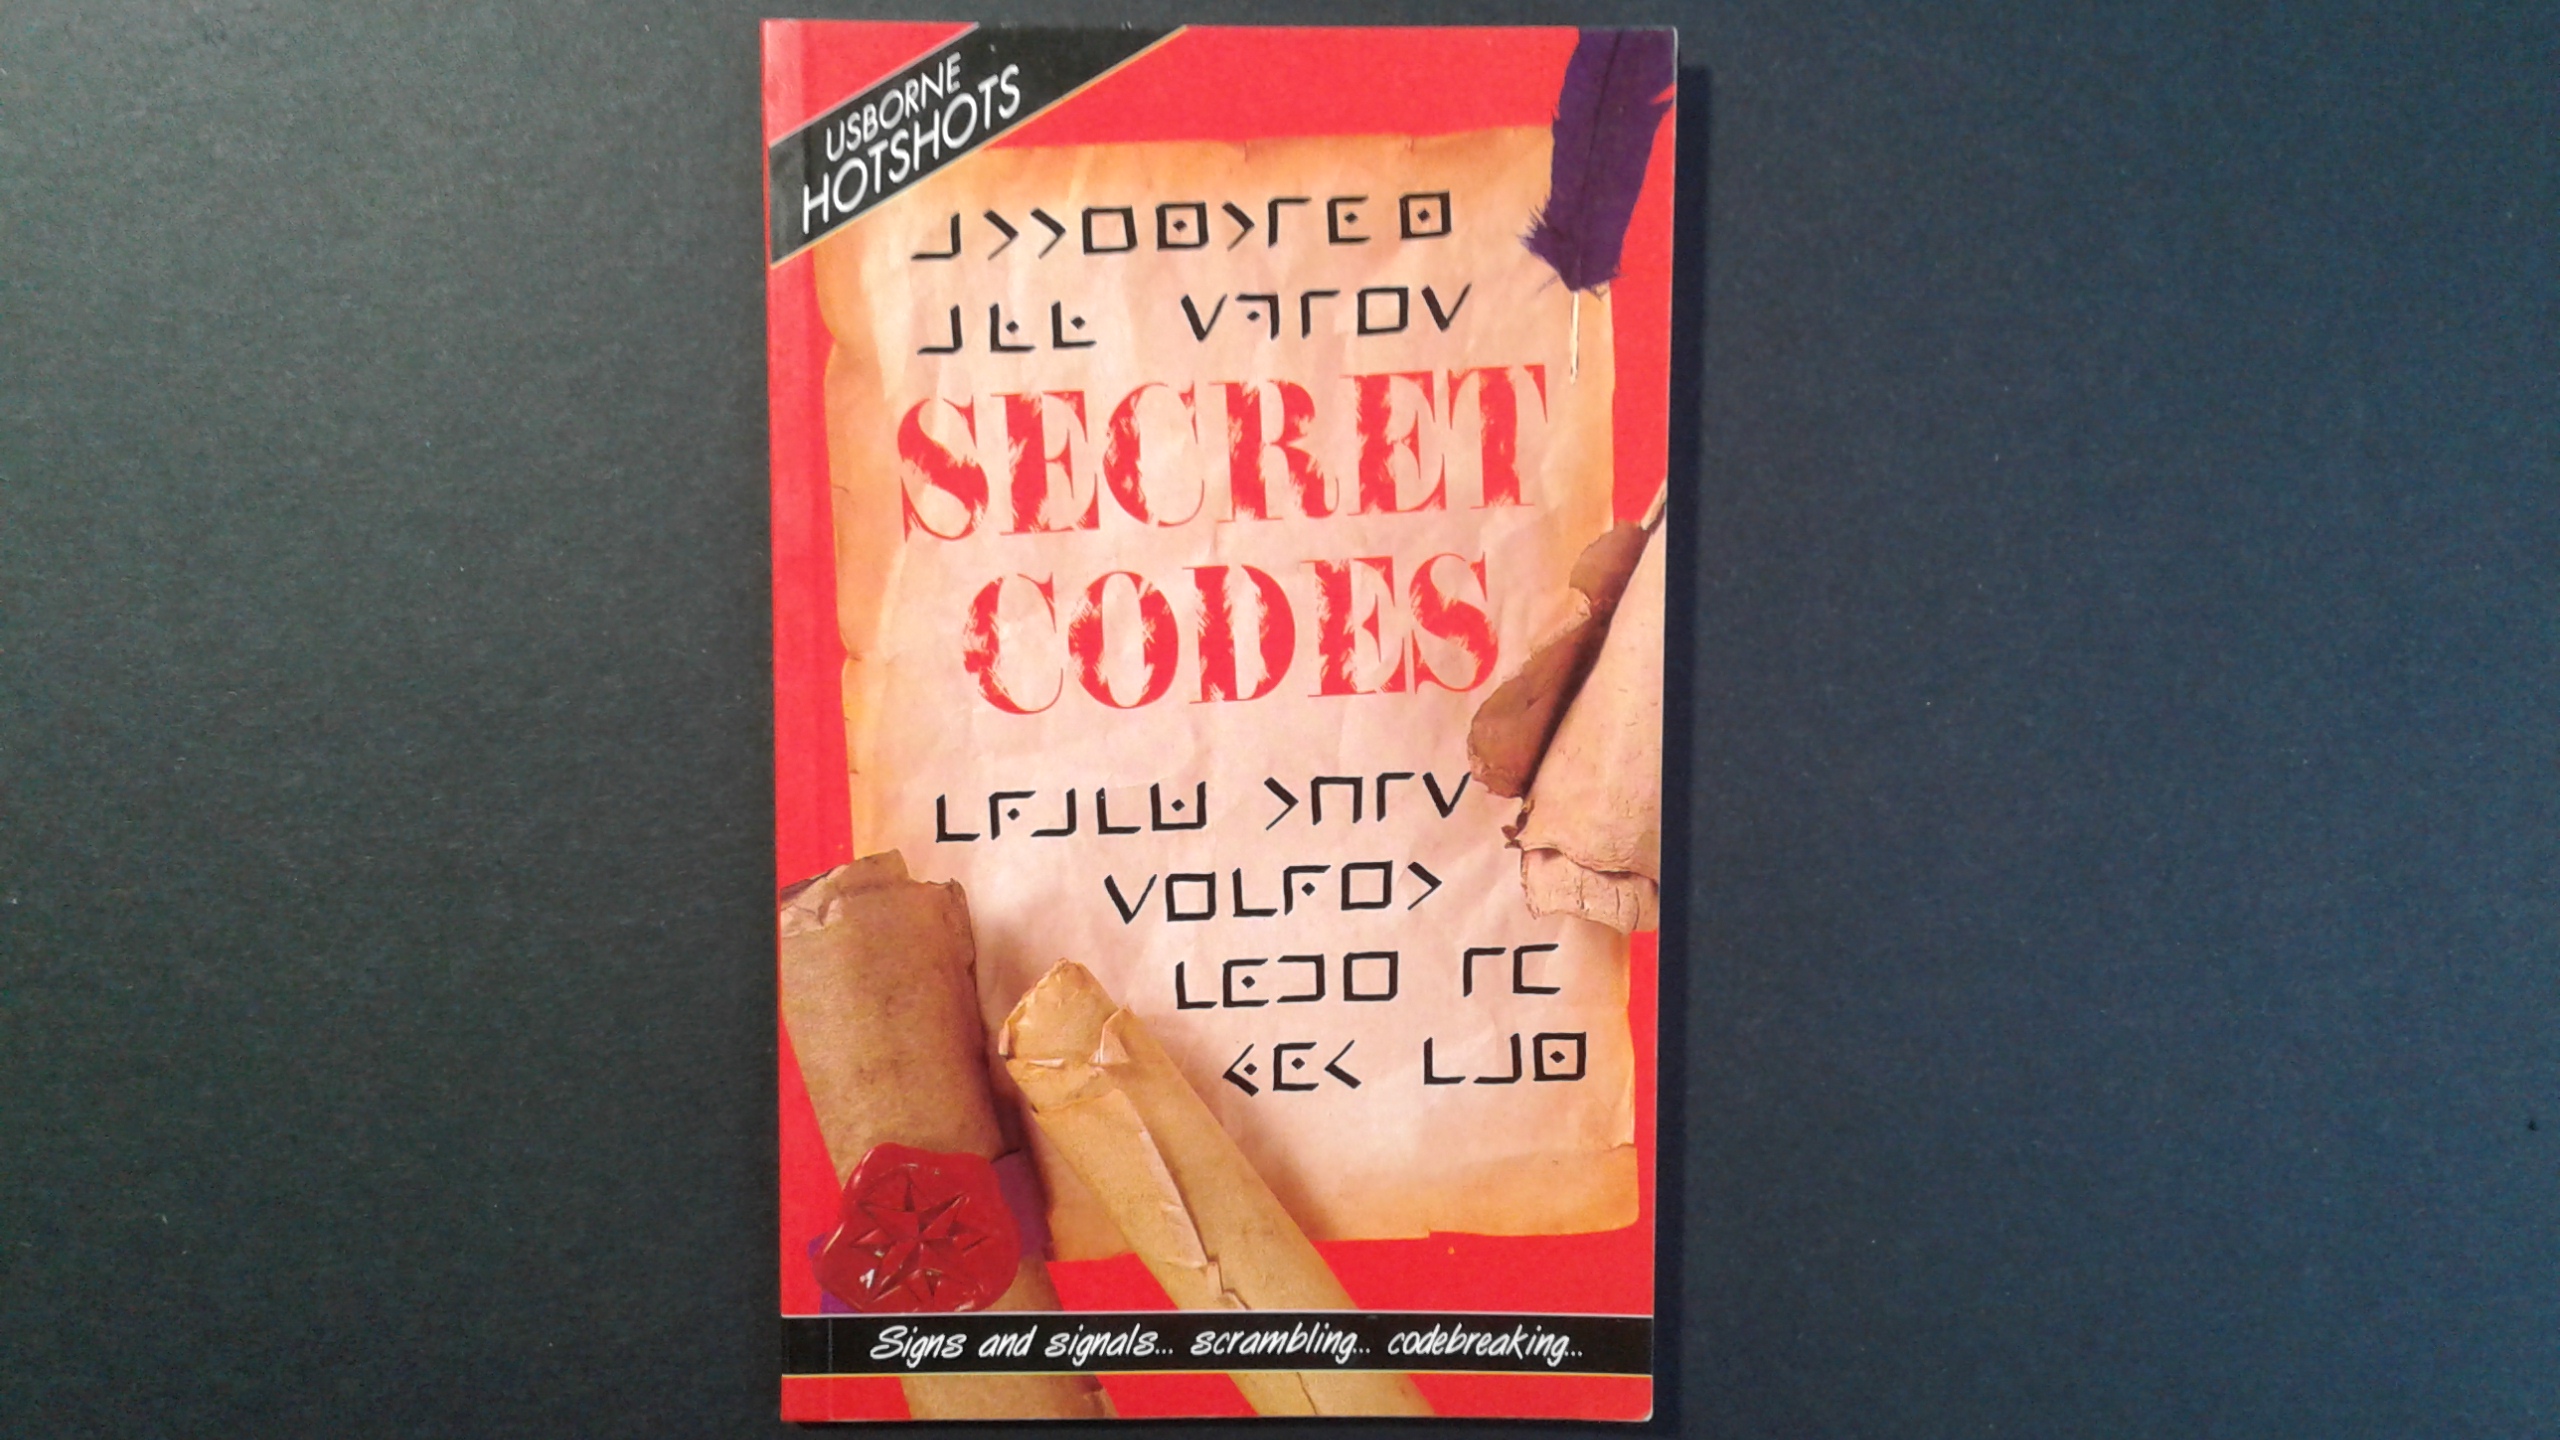 the secret codes book review